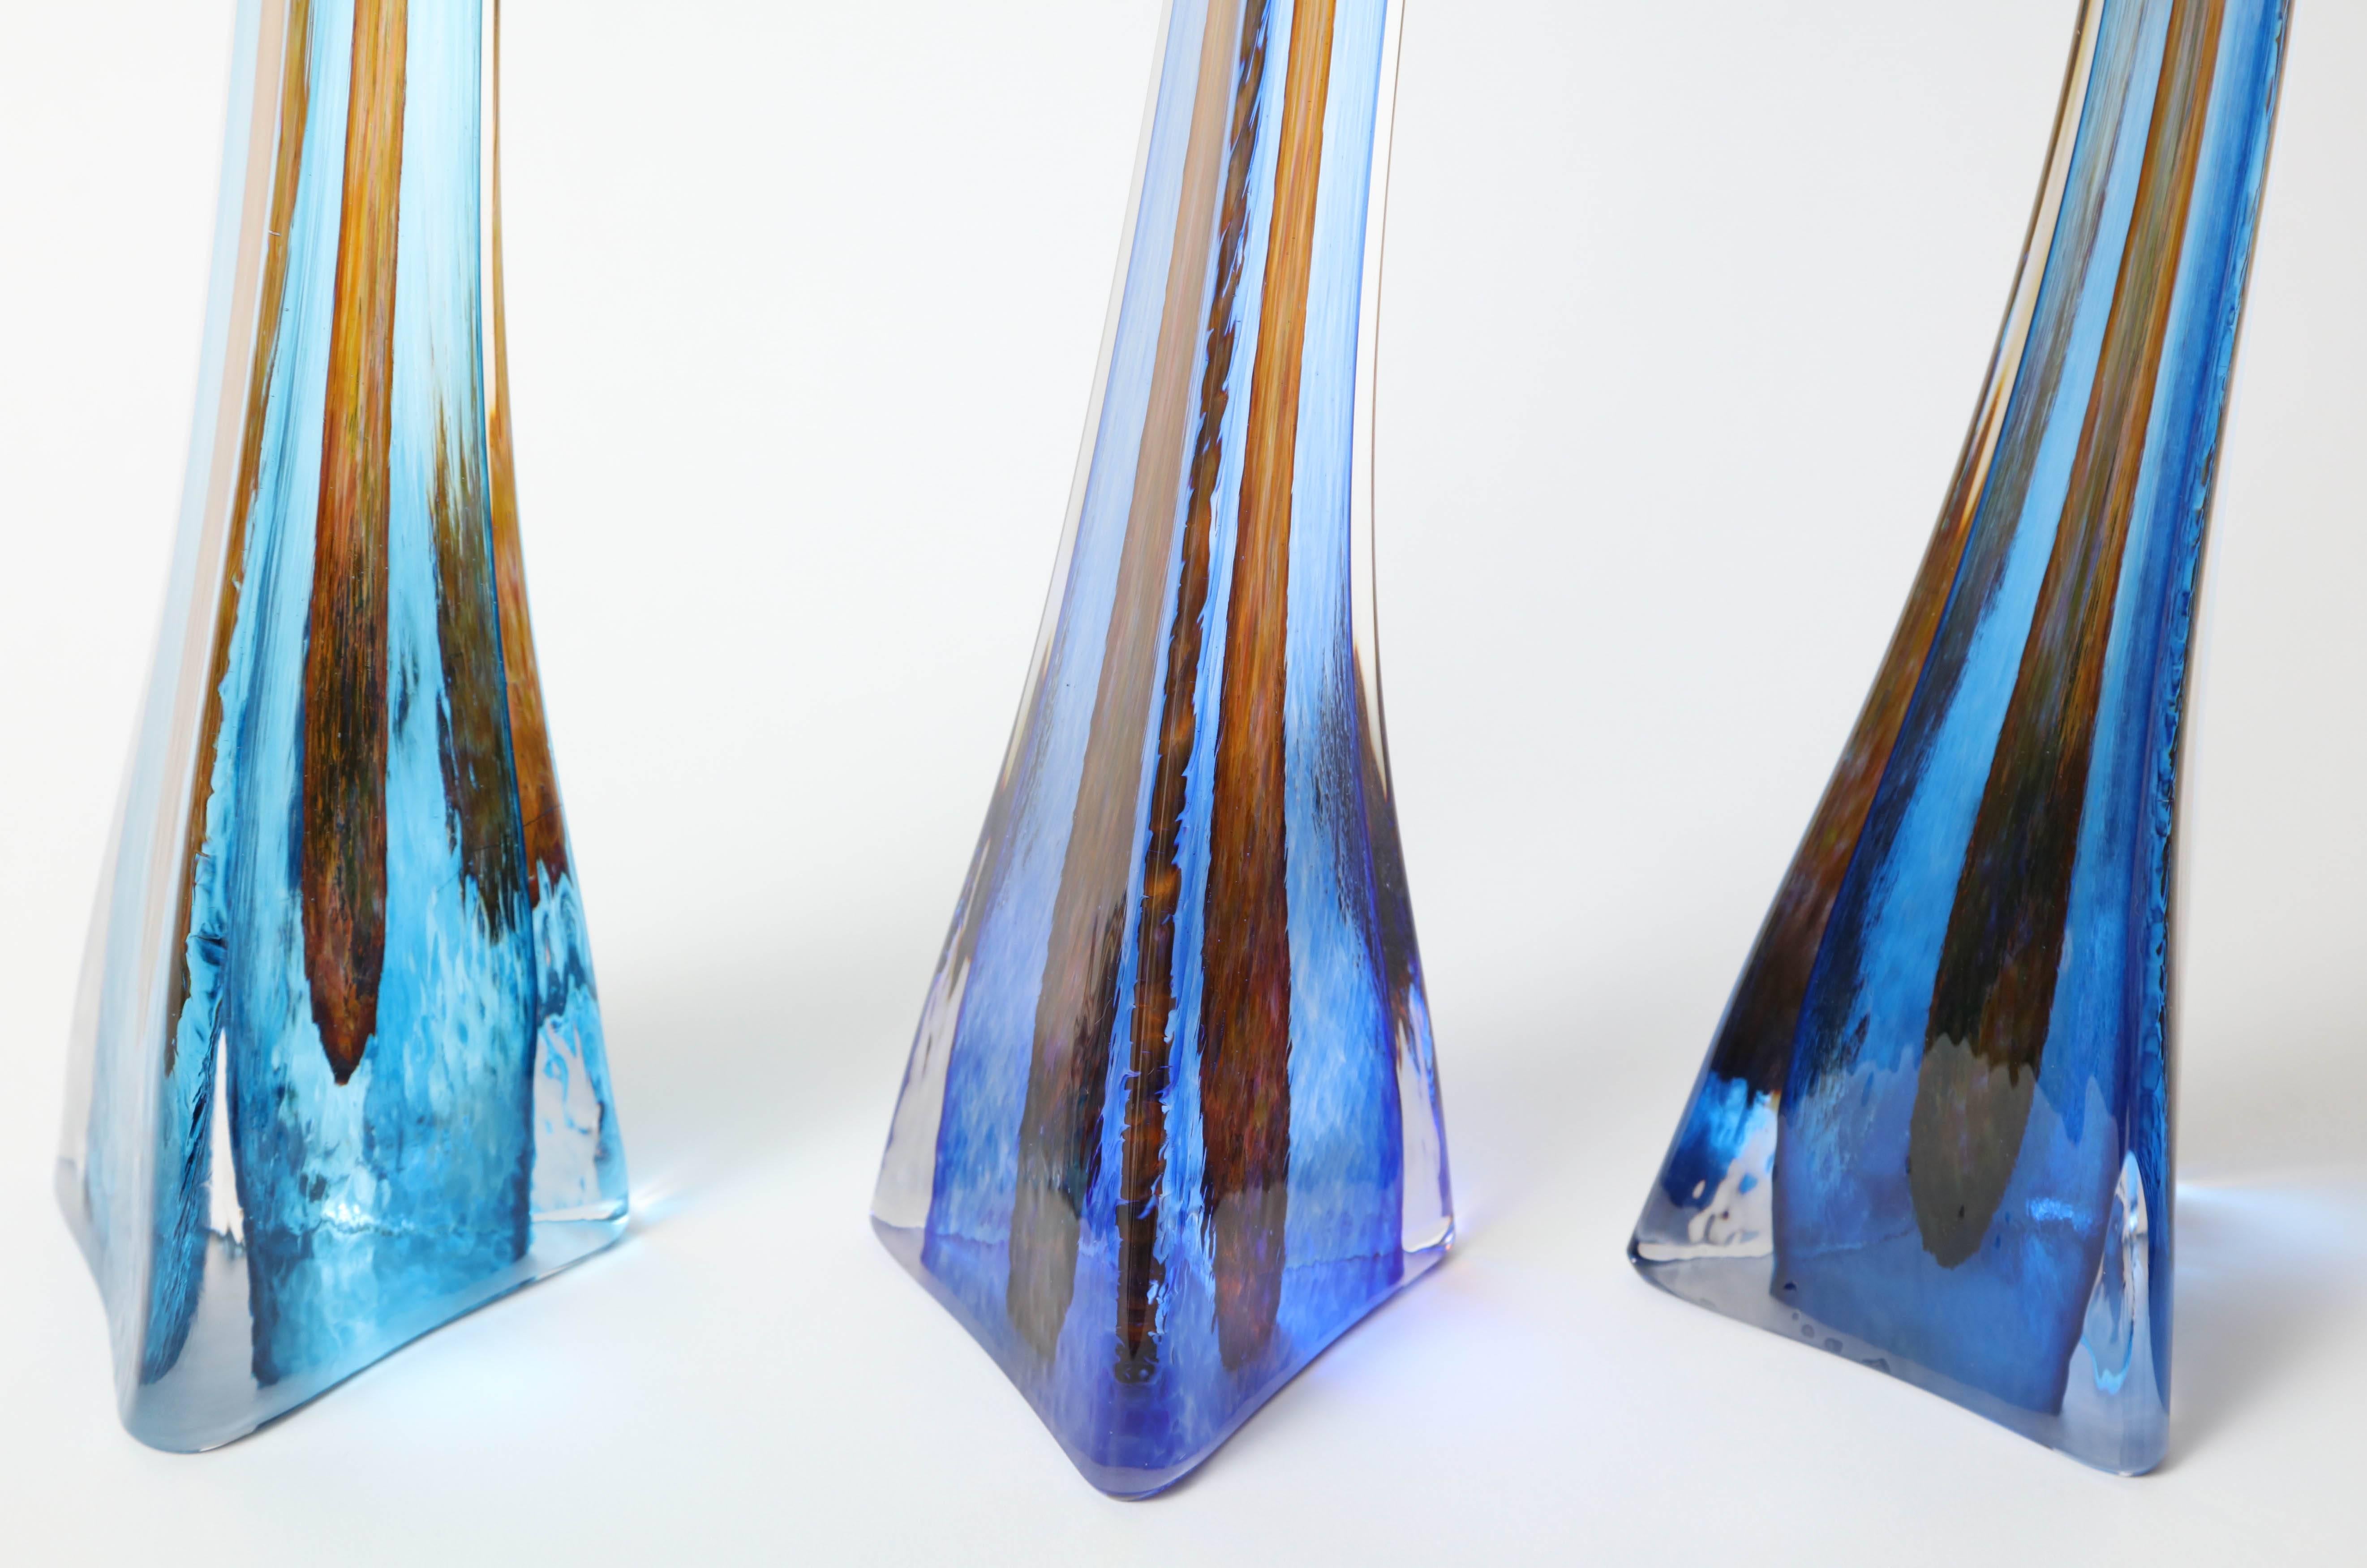 American Barry Entner Triangle Solids Glass Sculpture, 2014 For Sale